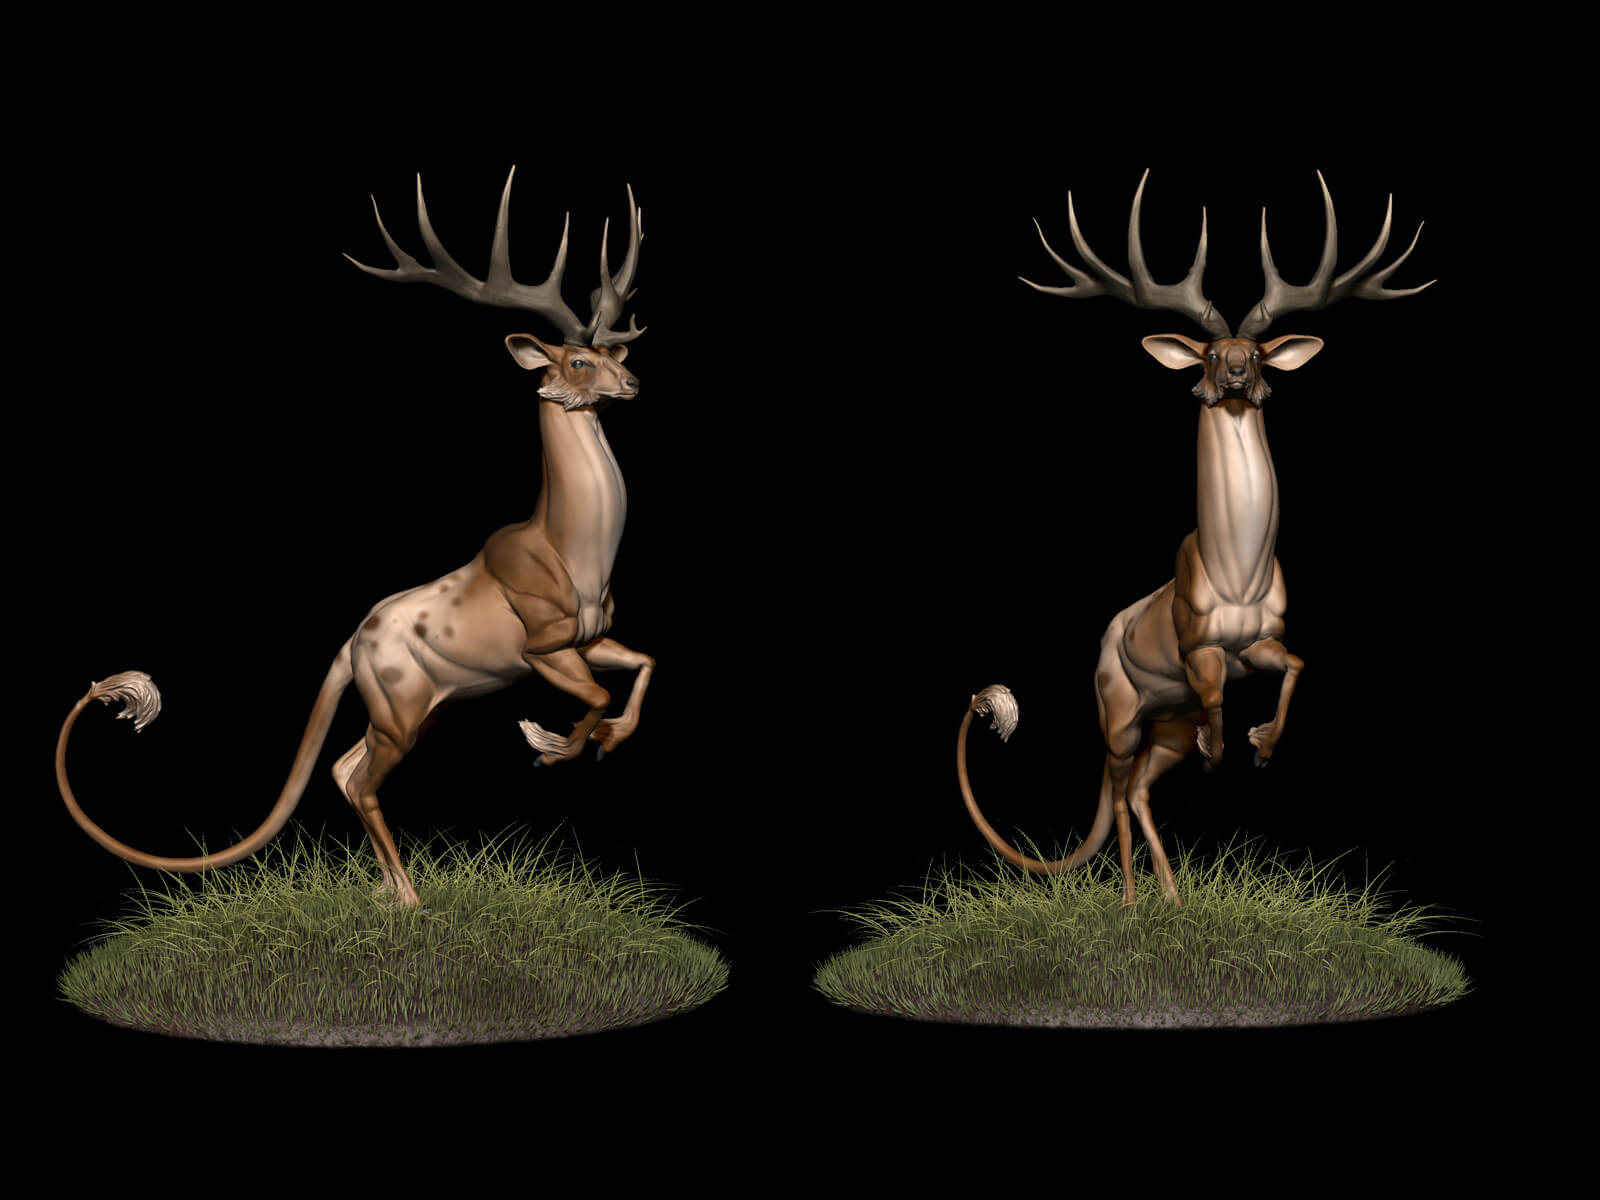 computer-generated 3d model of a deer-like creature on its hind legs